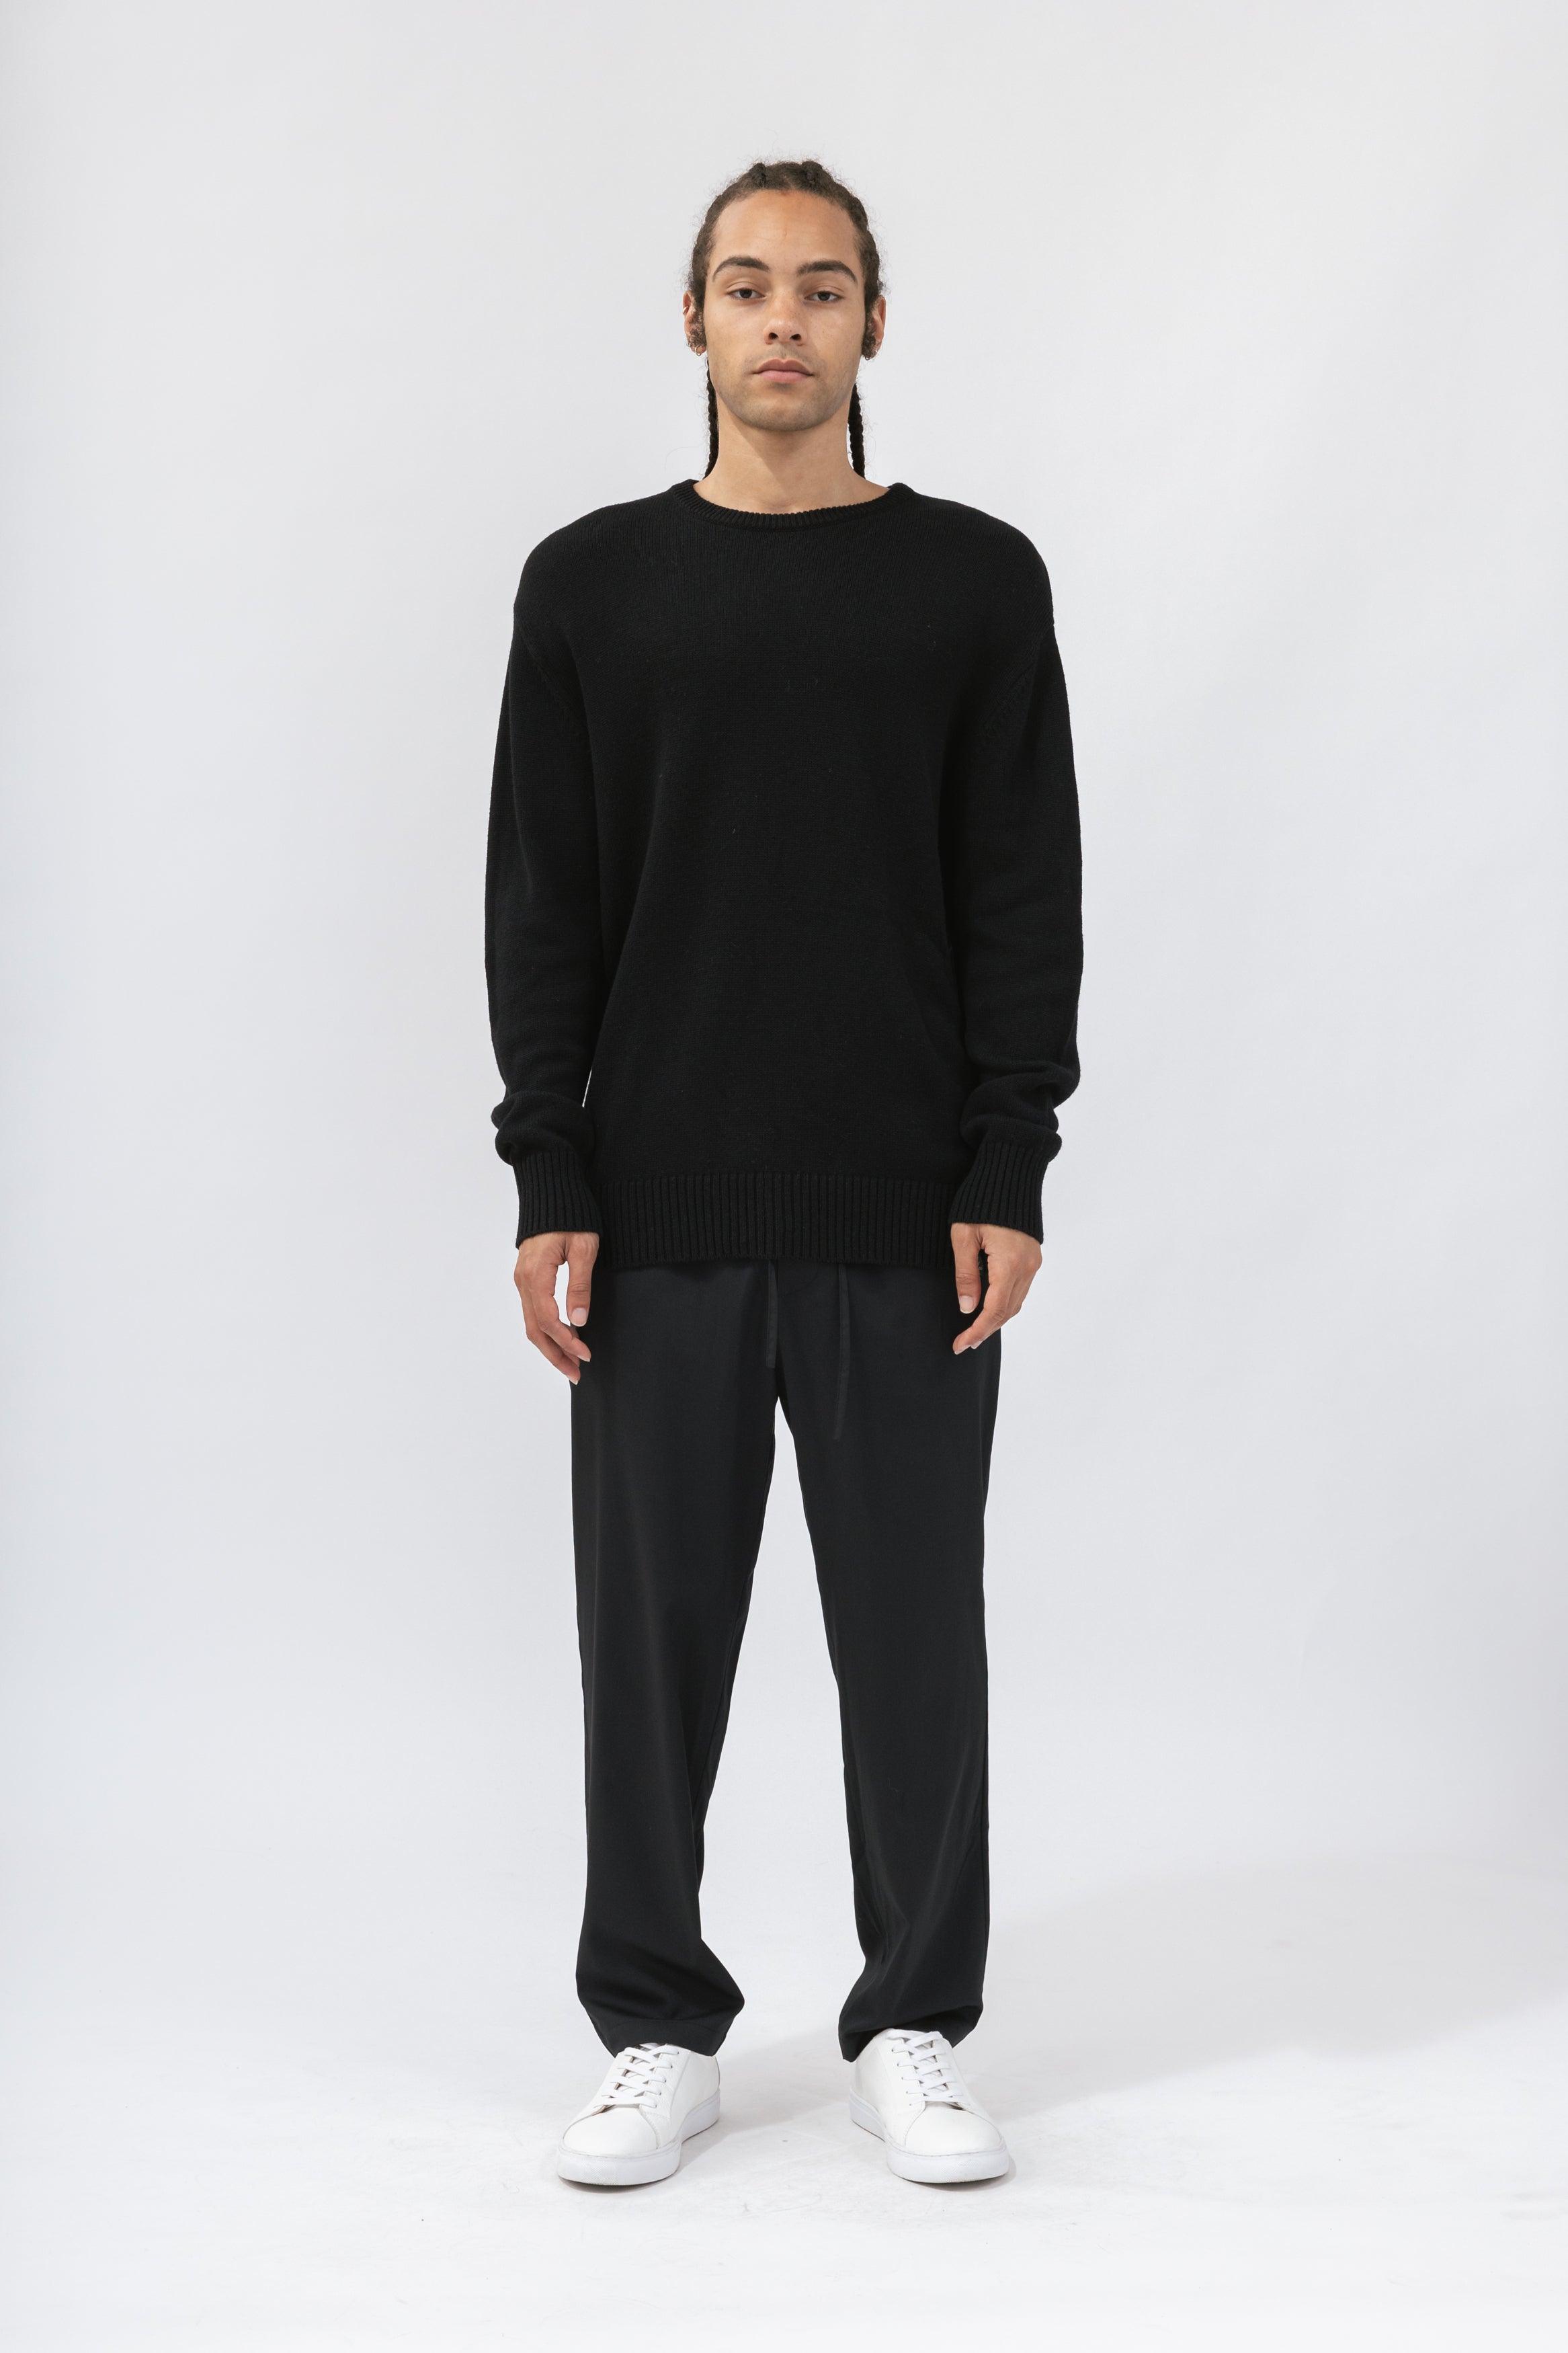 Men's Crew Neck Sweater - NOT LABELED